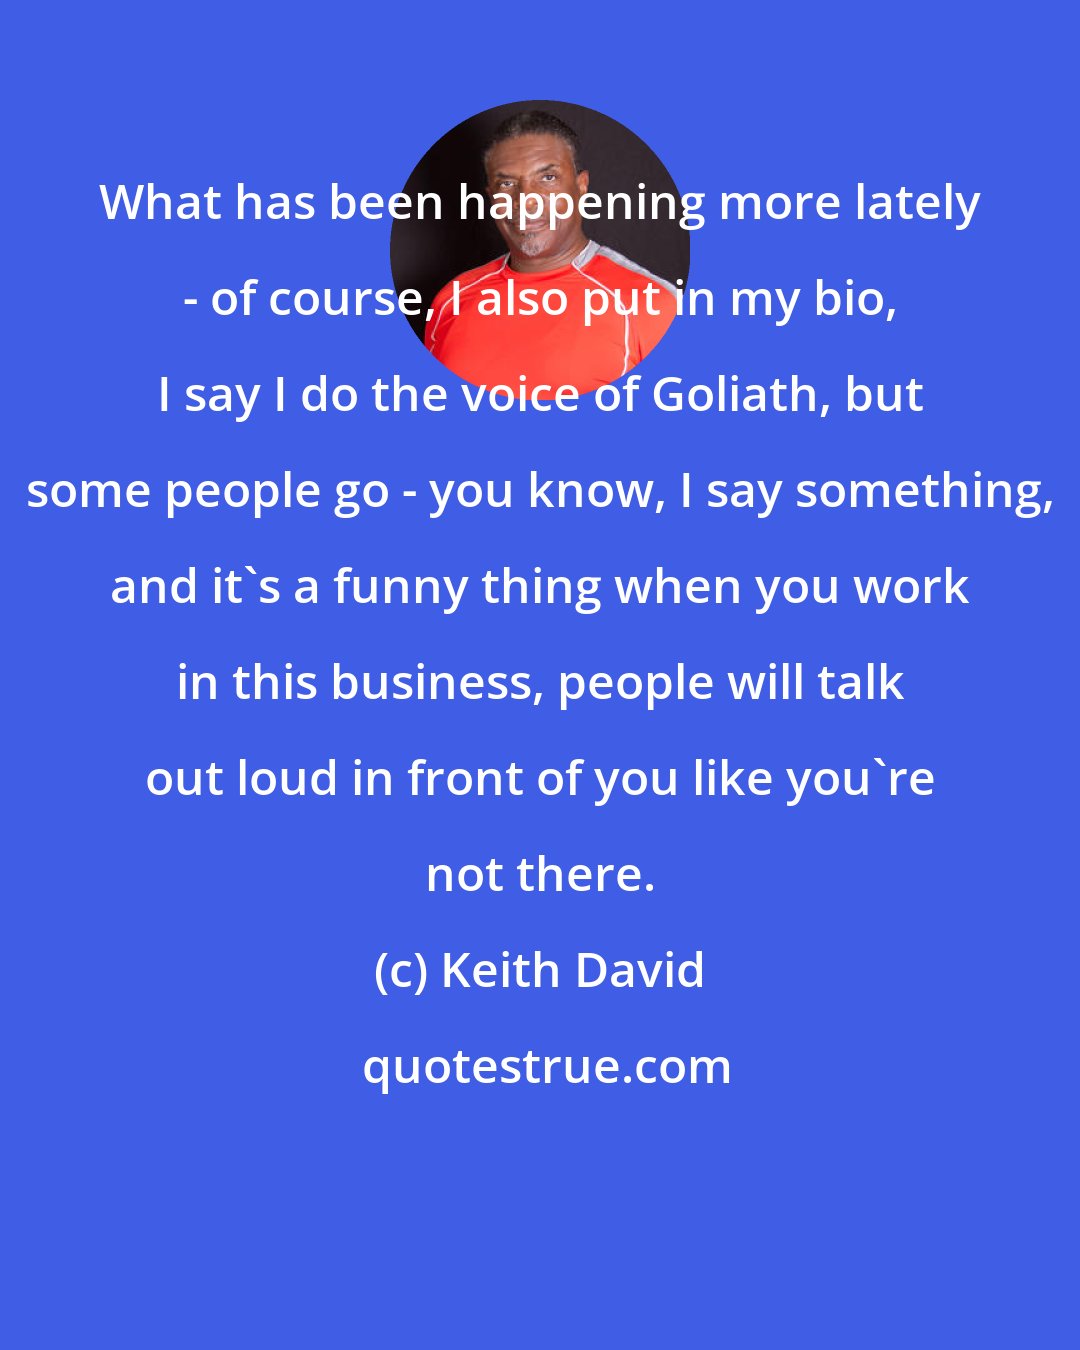 Keith David: What has been happening more lately - of course, I also put in my bio, I say I do the voice of Goliath, but some people go - you know, I say something, and it's a funny thing when you work in this business, people will talk out loud in front of you like you're not there.